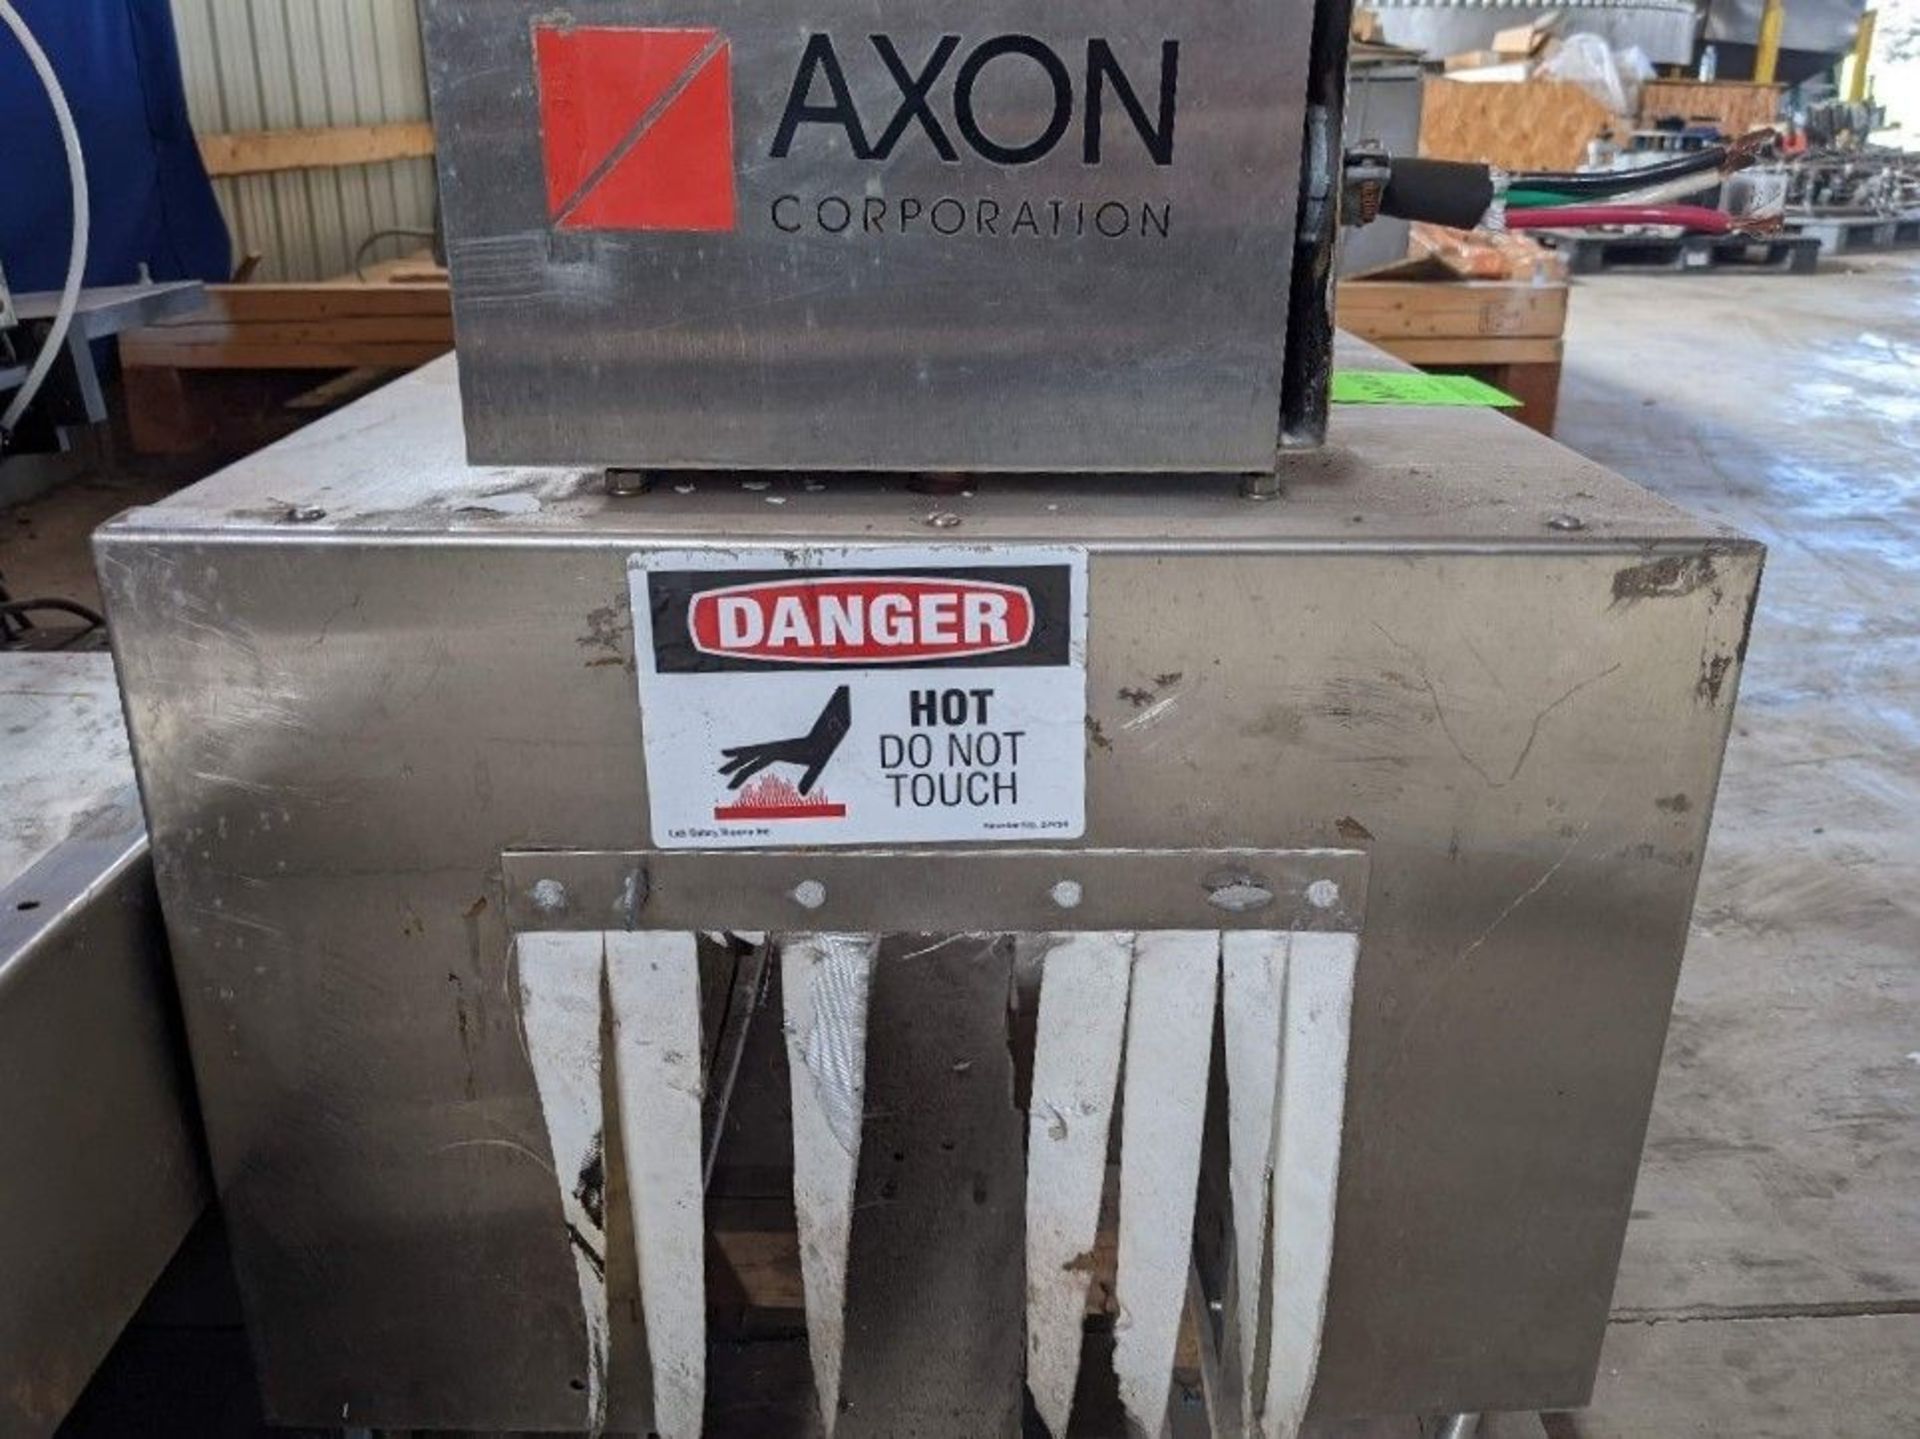 Qty (1) Axon Shrink Tunnel for Neck Bands or Sleeve Labels - Stainless steel - 24' L x 18' W x 22' H - Image 2 of 4